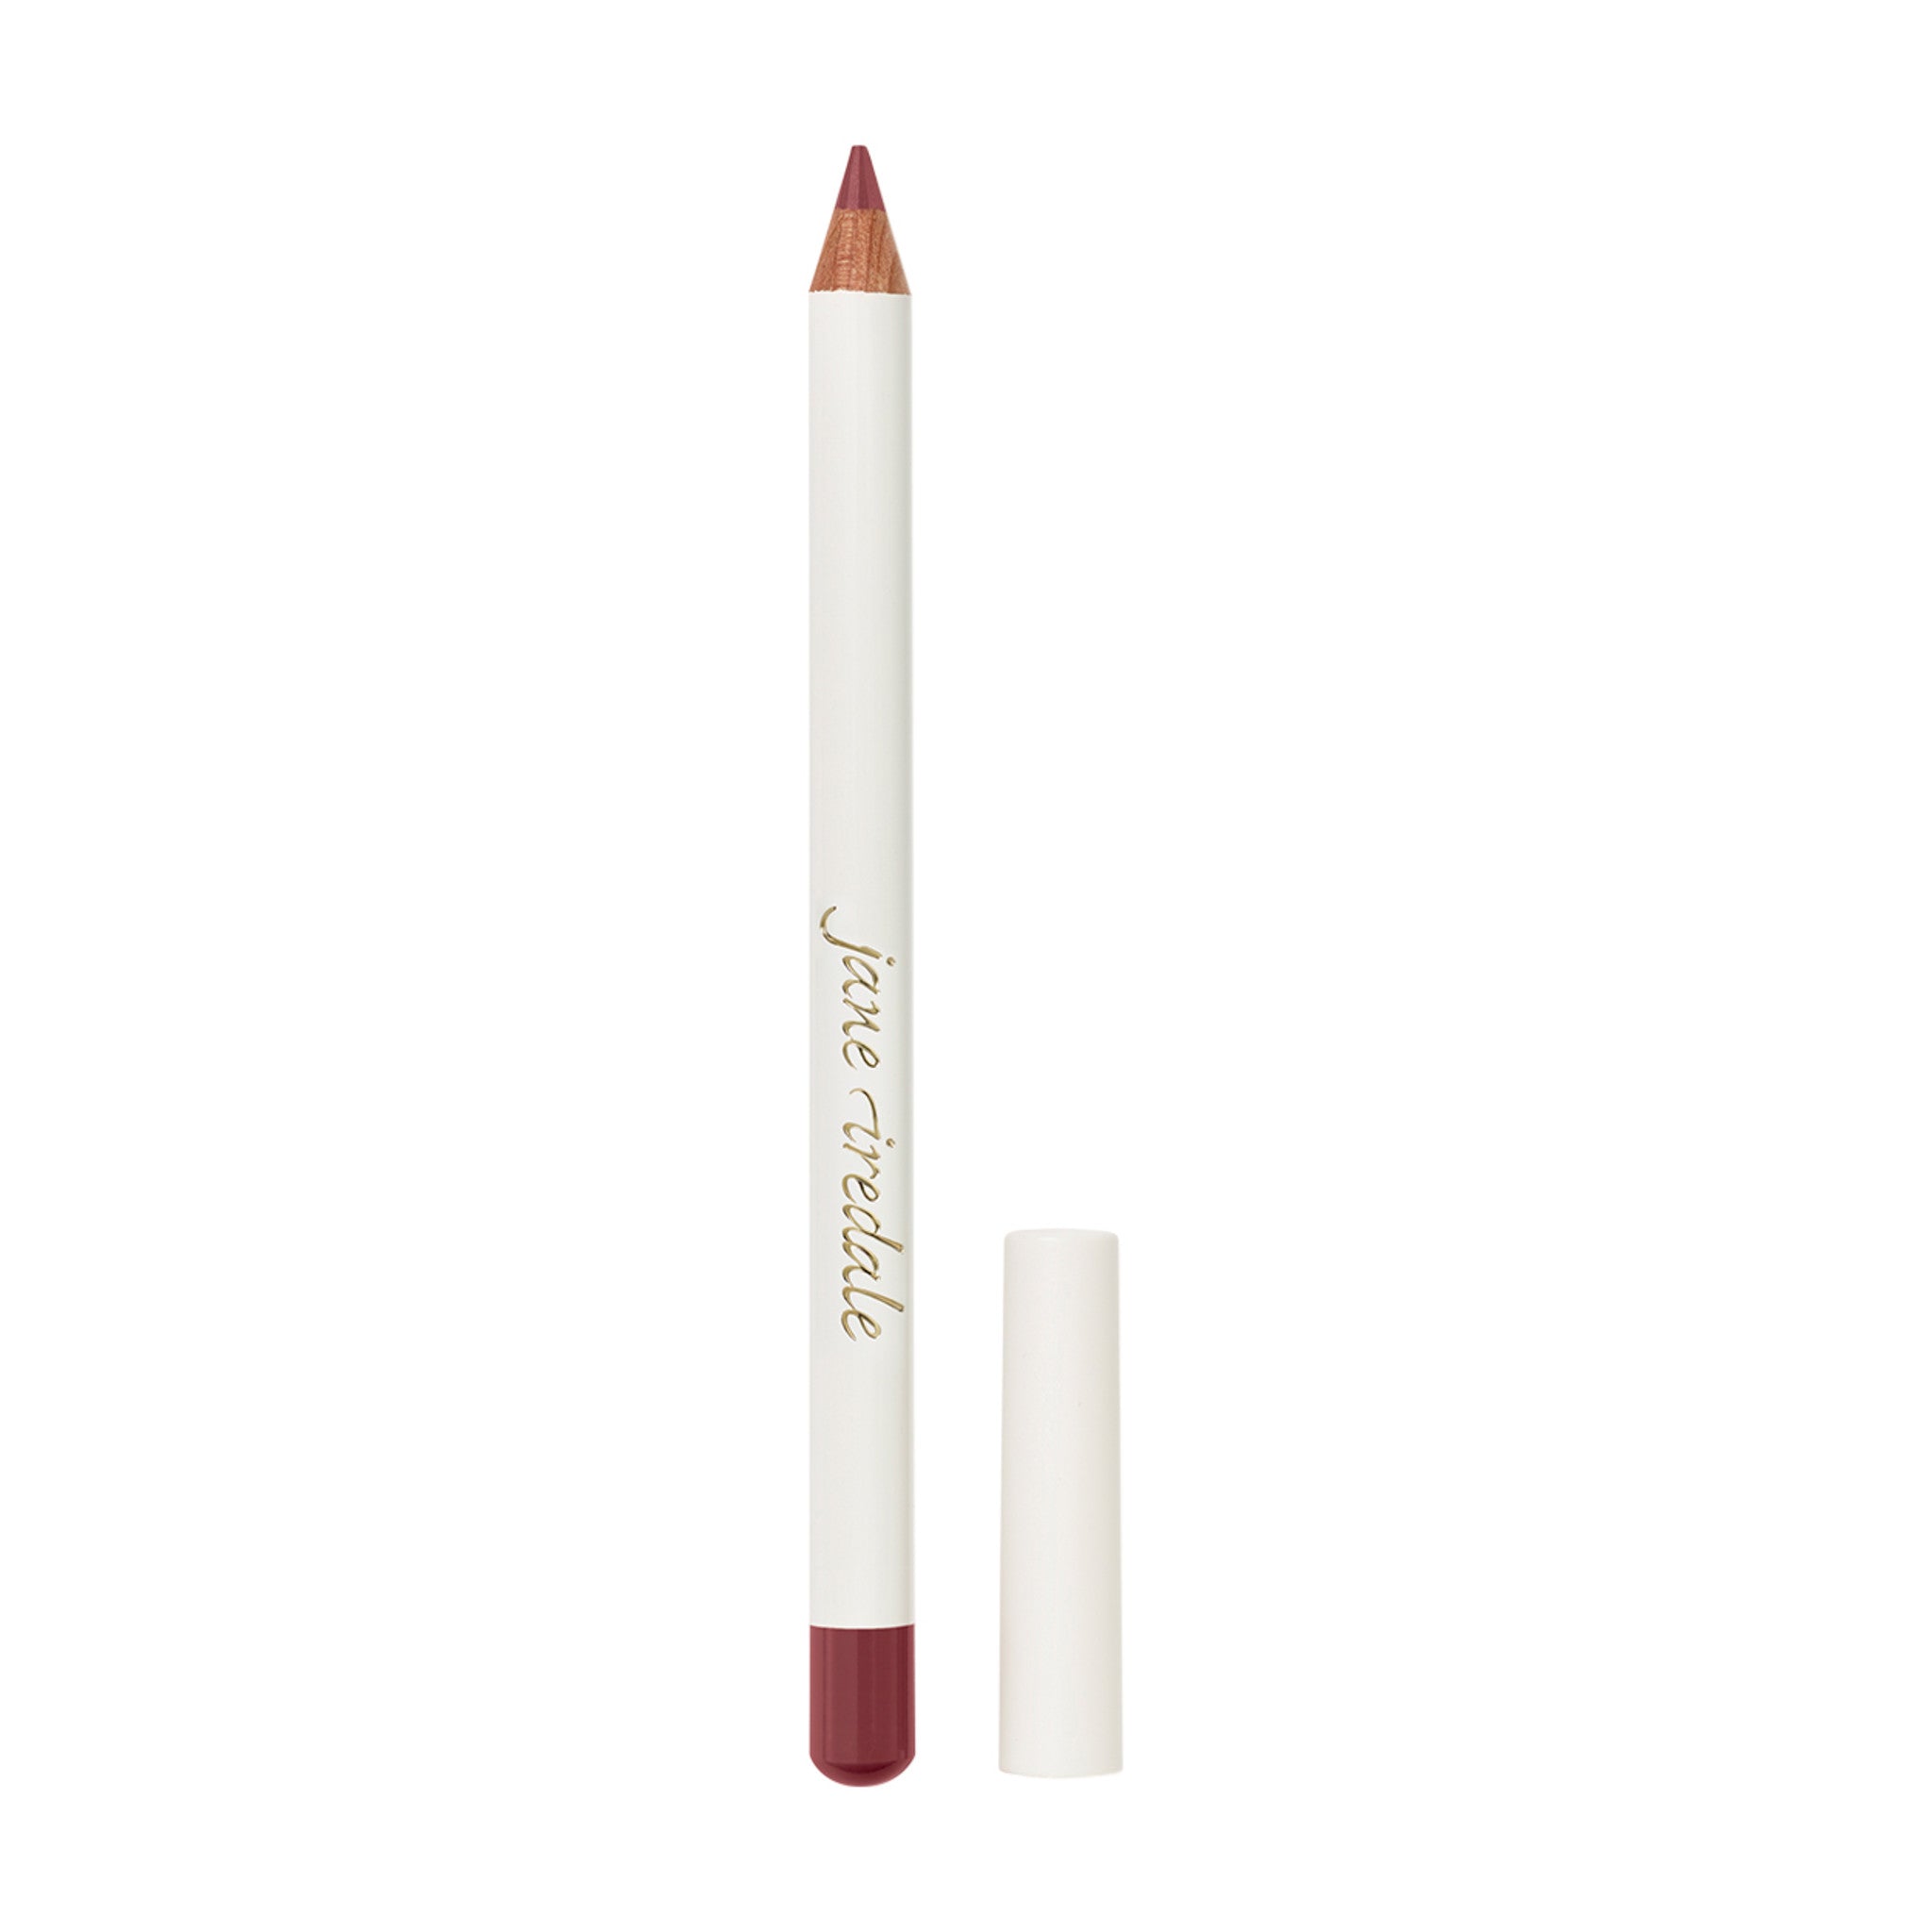 Jane Iredale Lip Pencil Color/Shade variant: Rose main image. This product is in the color pink